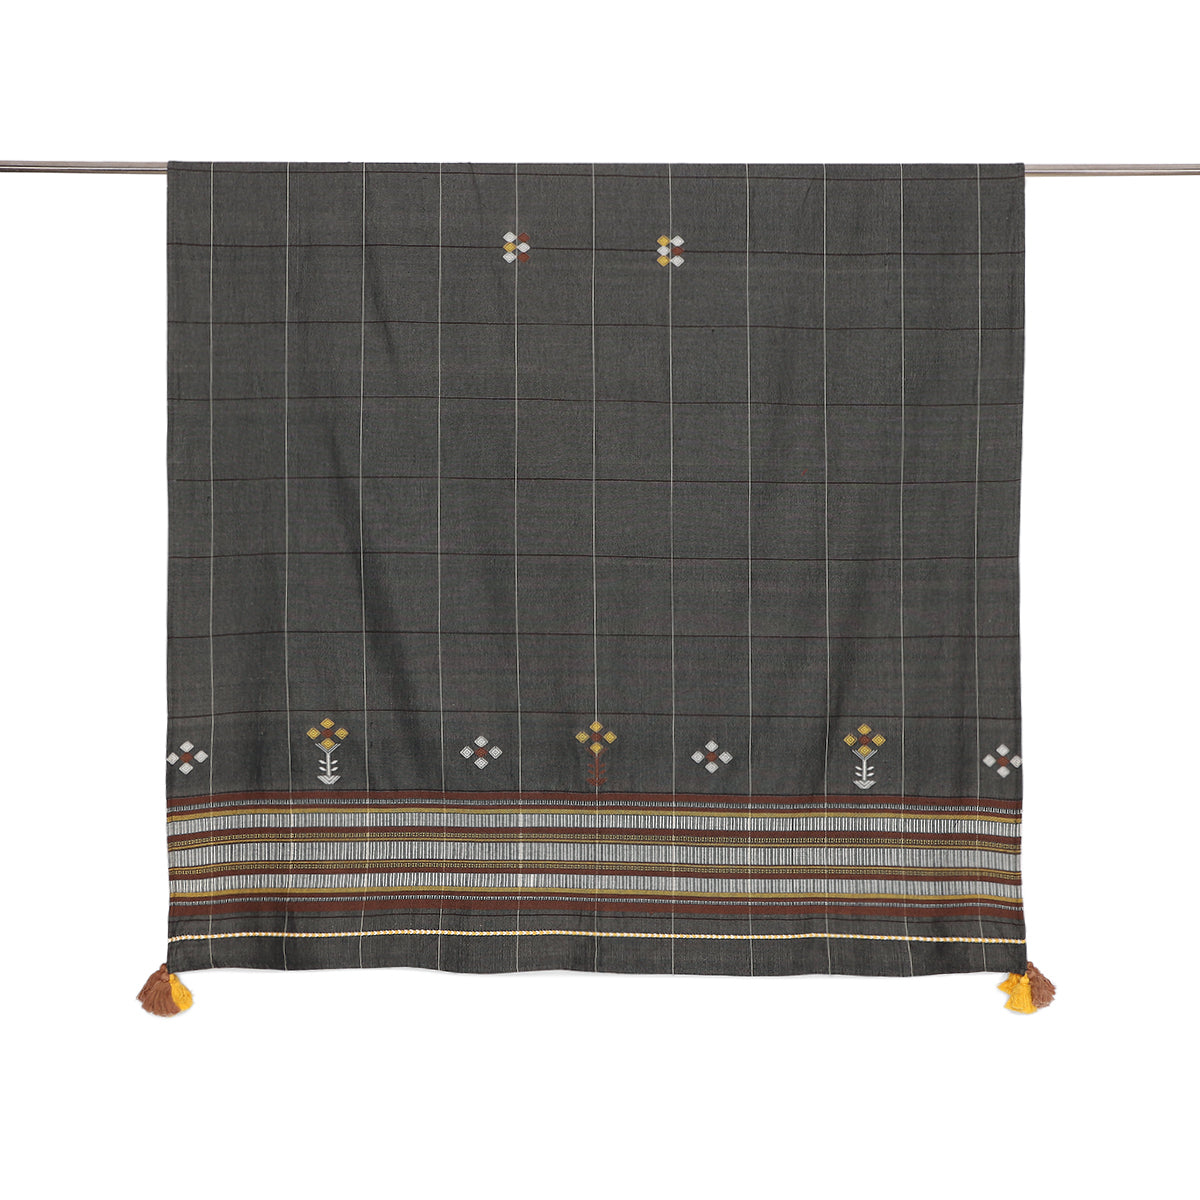 Wardha Extra Weft Cotton Table Cover